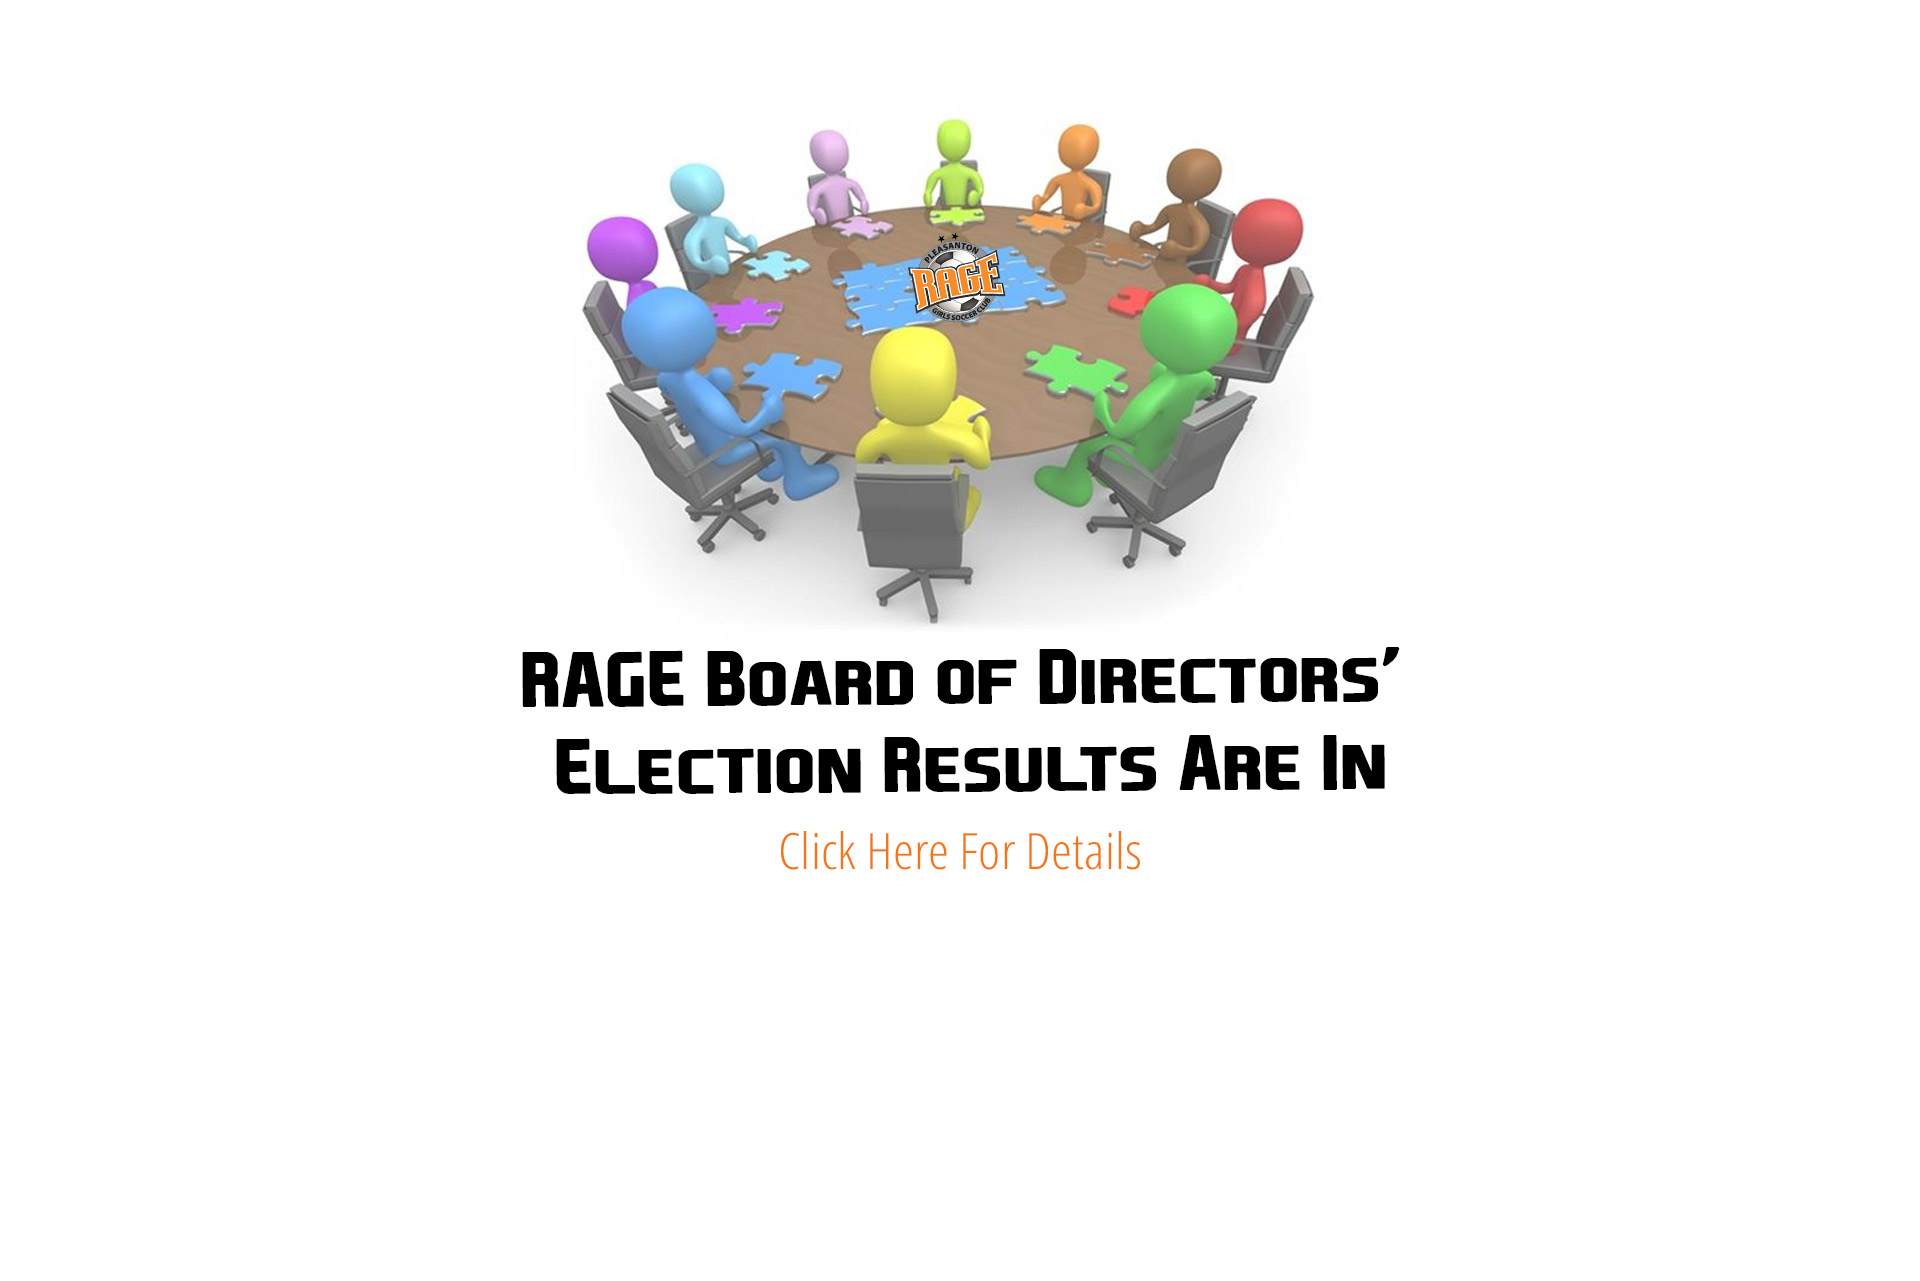 2022 Election Results